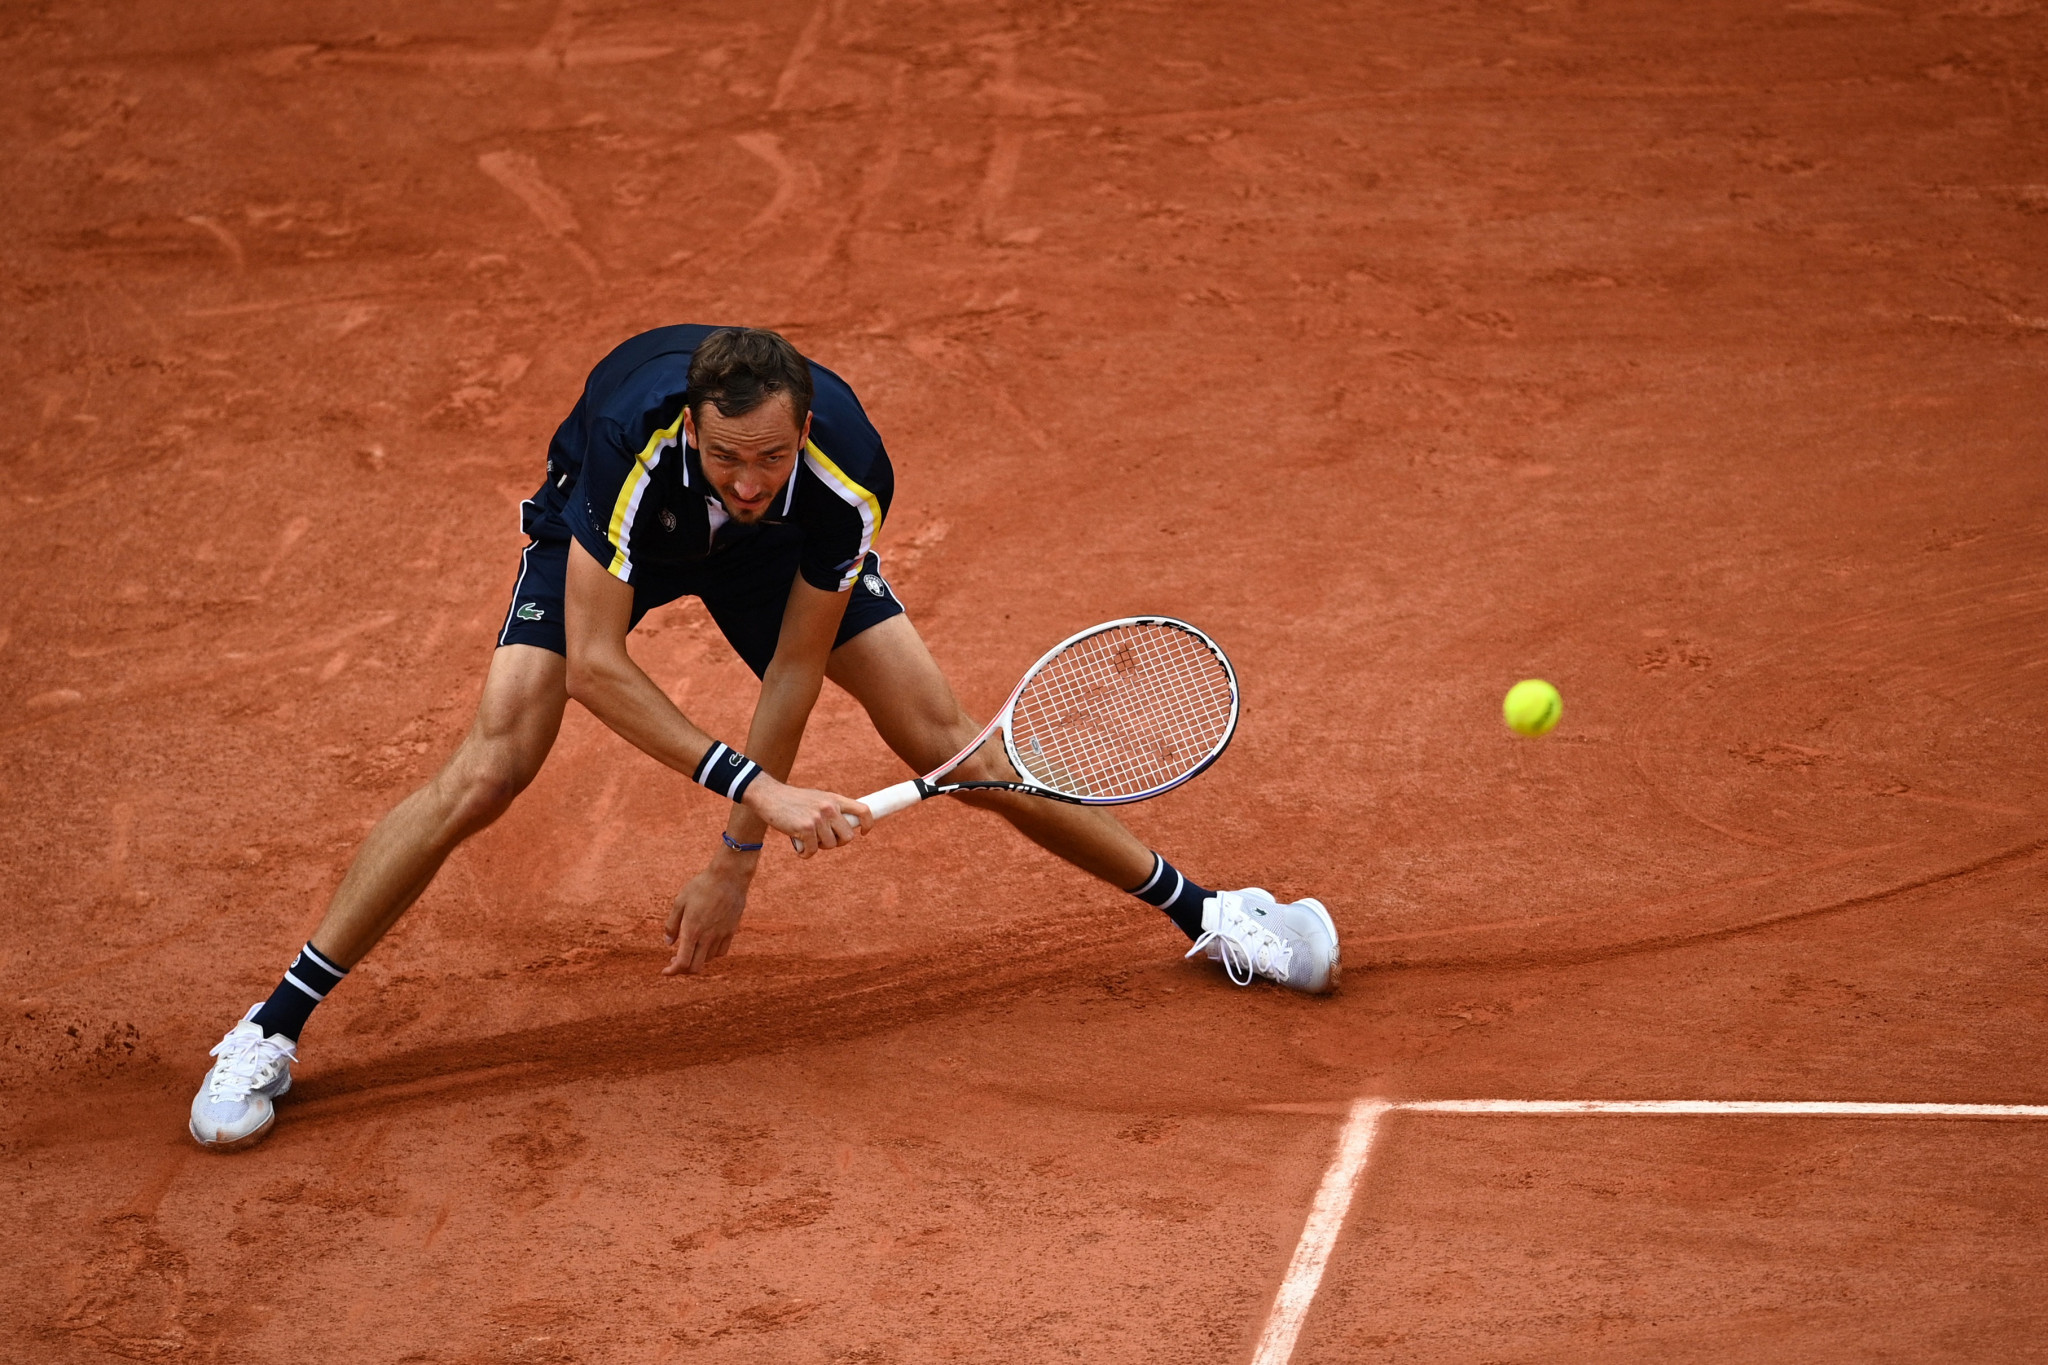 Daniil Medvedev digs out a return during his encounter with big-serving American Reilly Opelka ©Getty Images